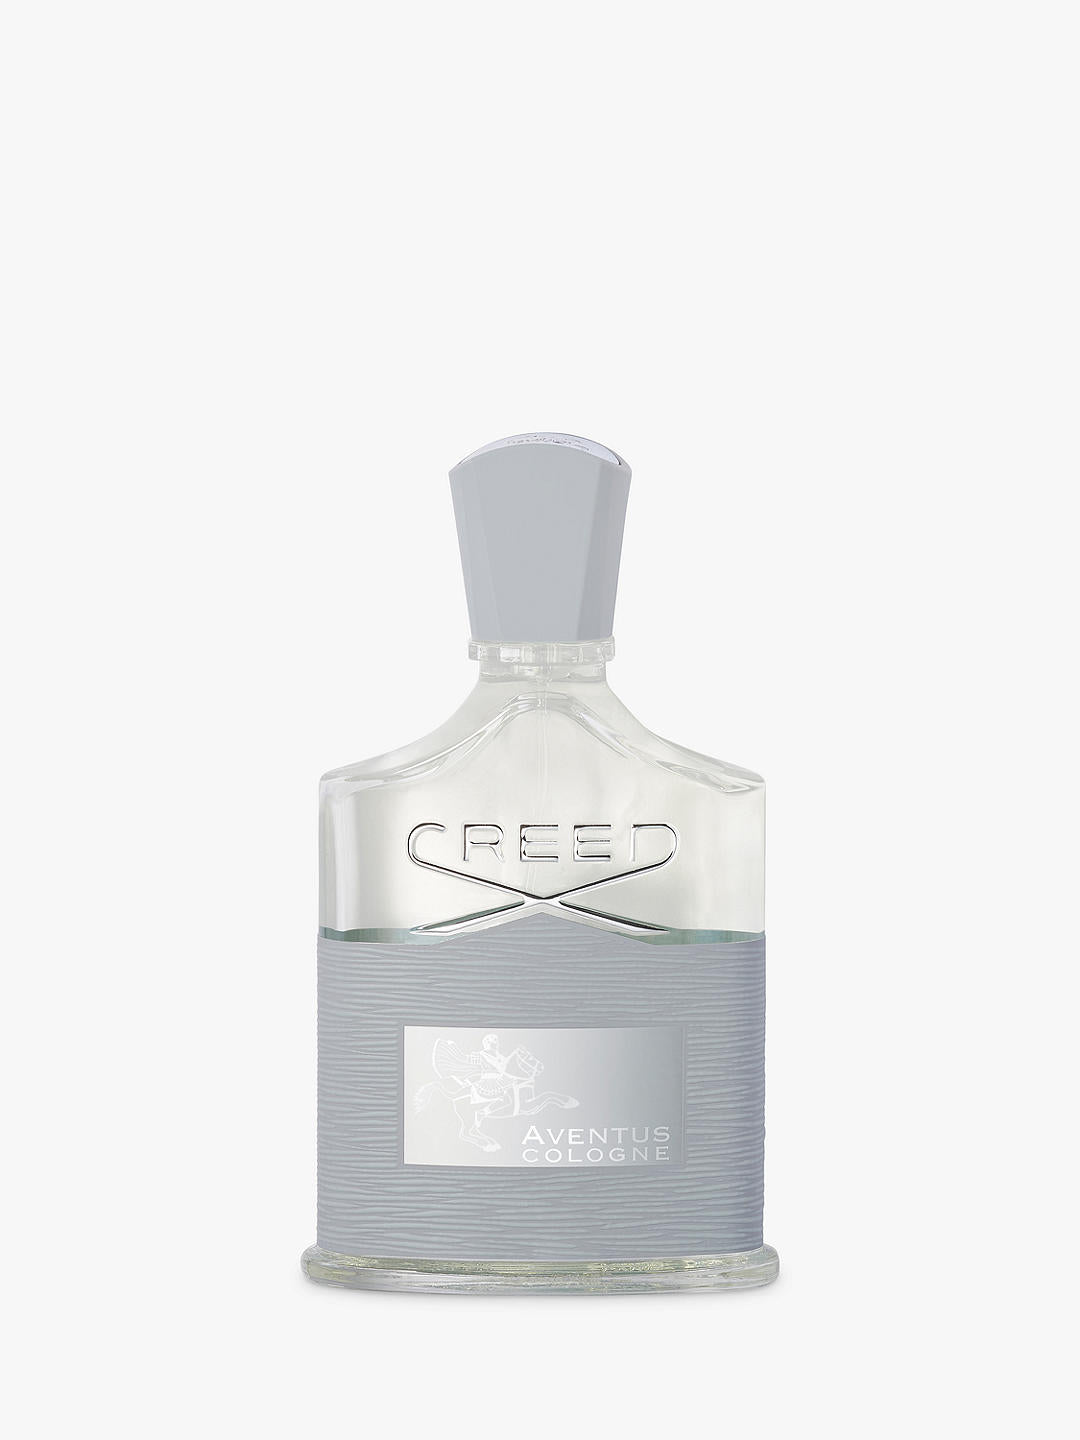 Creed Aventus Cologne | Creed Aventus Fragrance | Fragrance Samples|Perfume samples